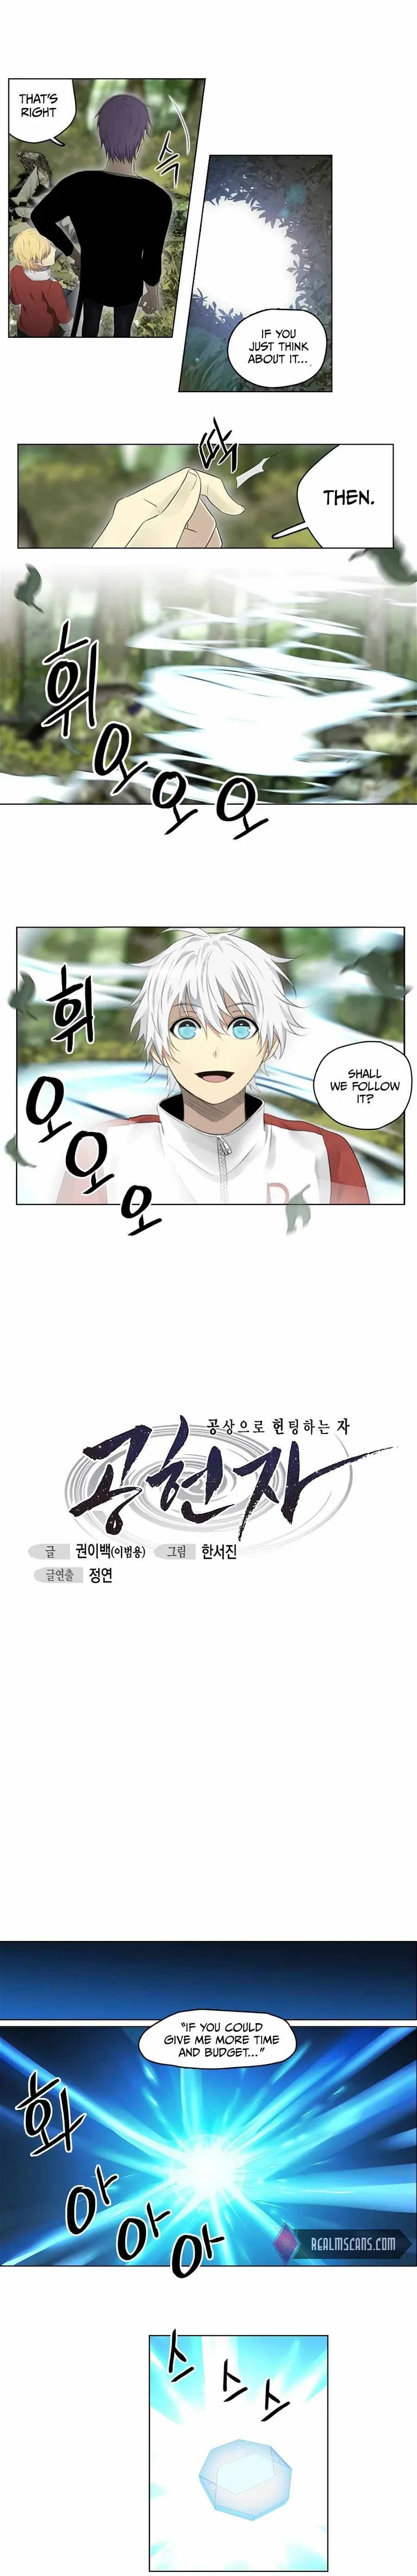 Gong Heon Ja Chapter 20 page 8